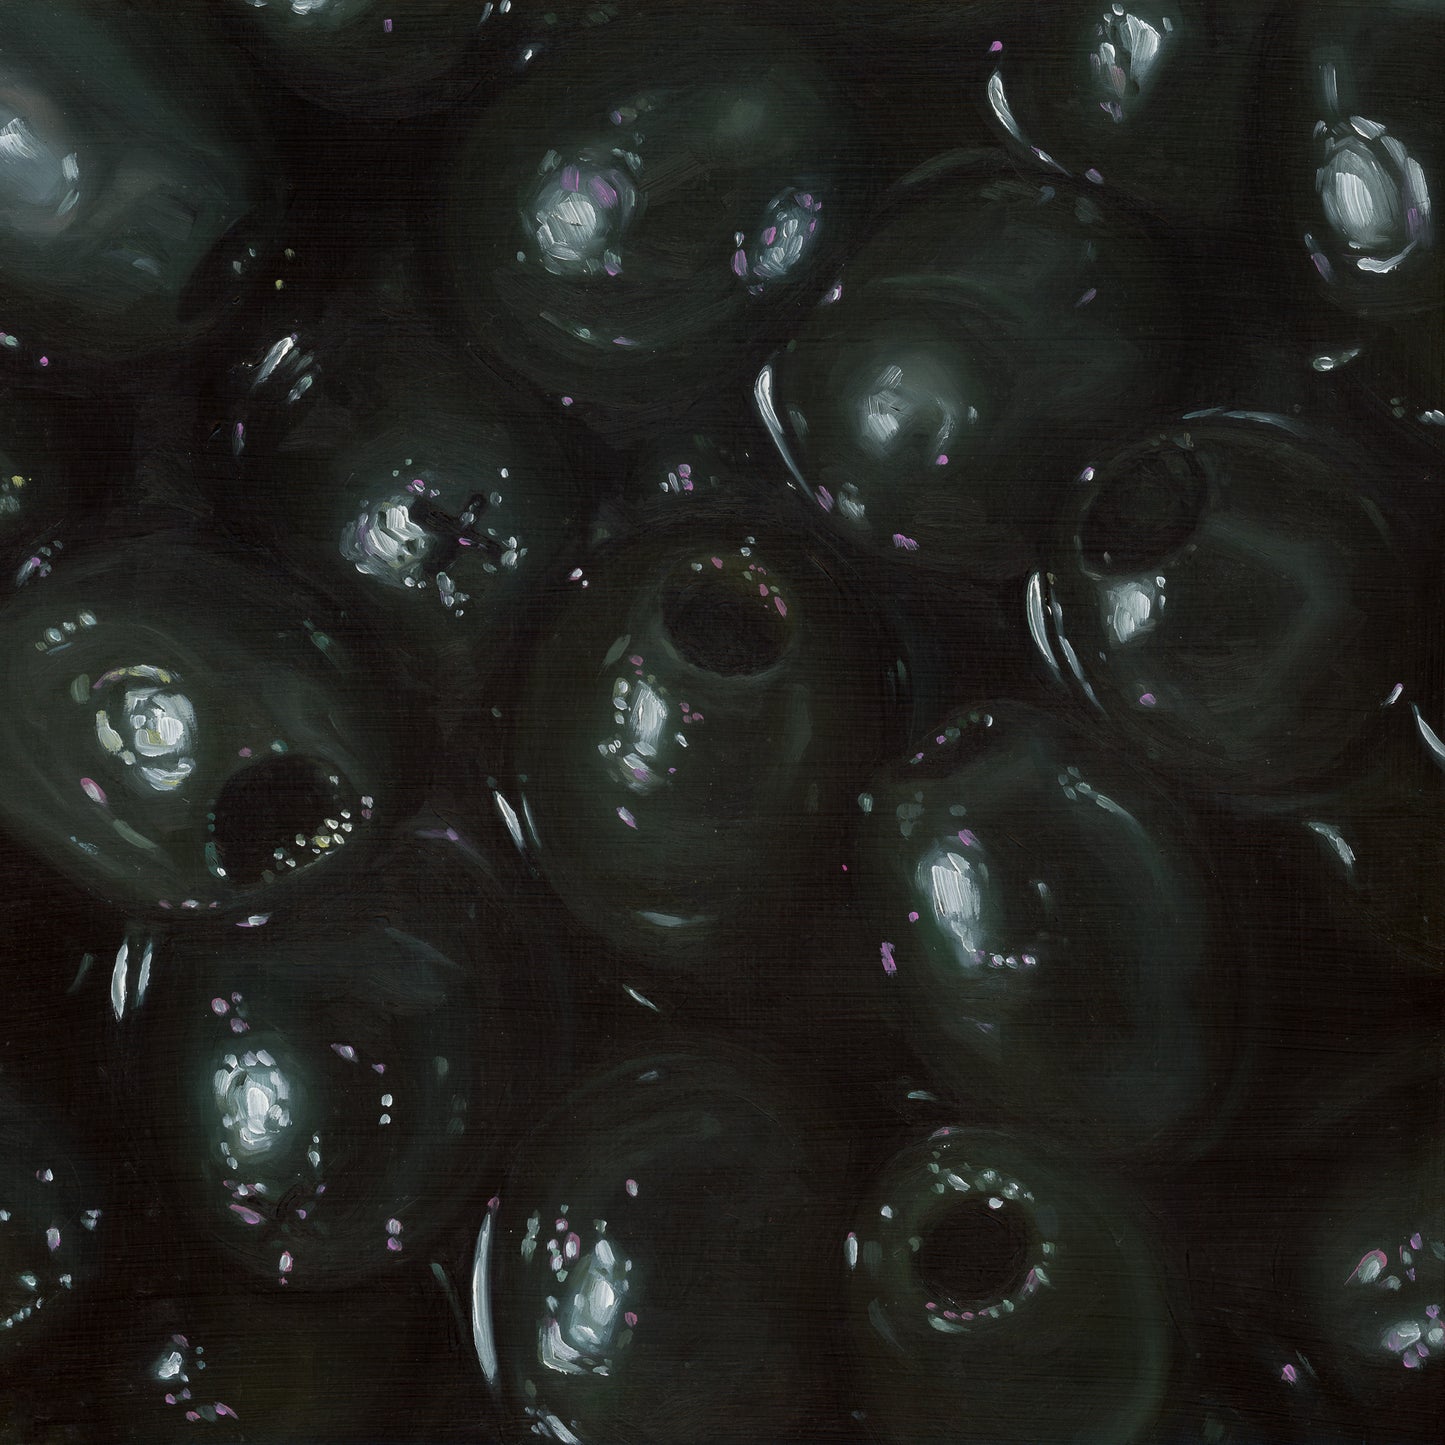 The original painting “Black Olives" by Hannah Kilby from Hannah Michelle Studios.